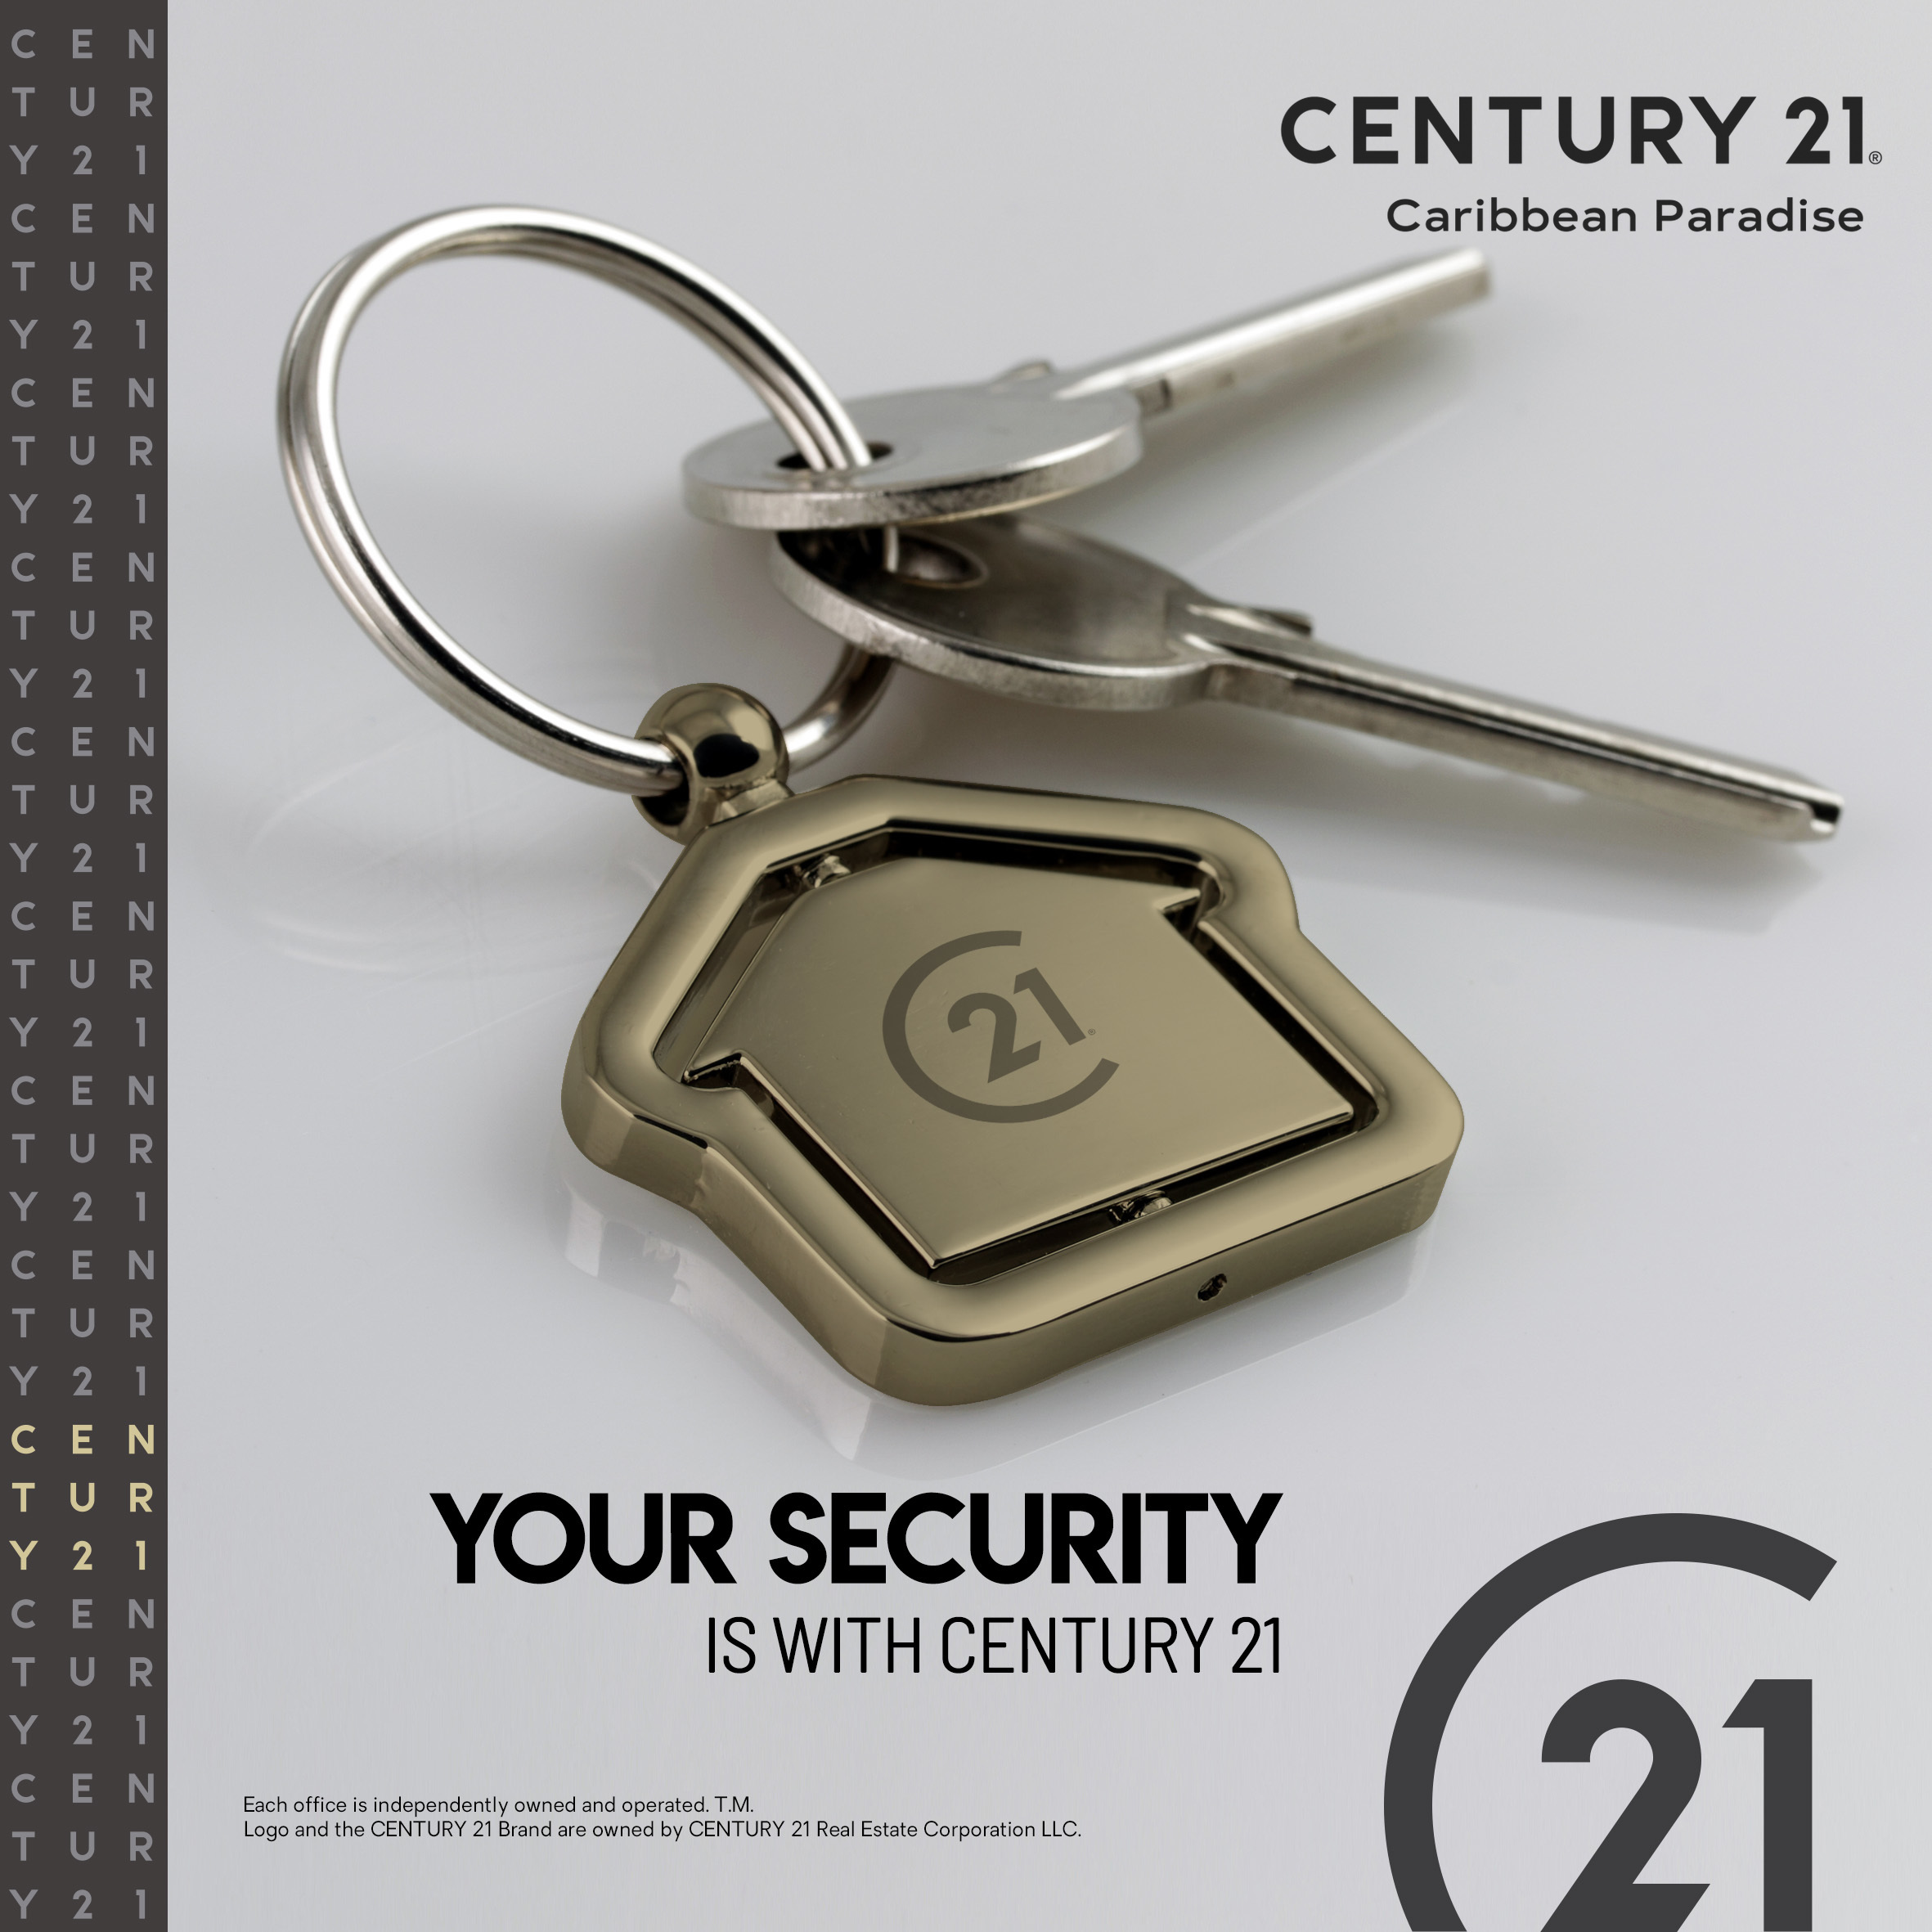 Buy with Century 21 for a safer buying process